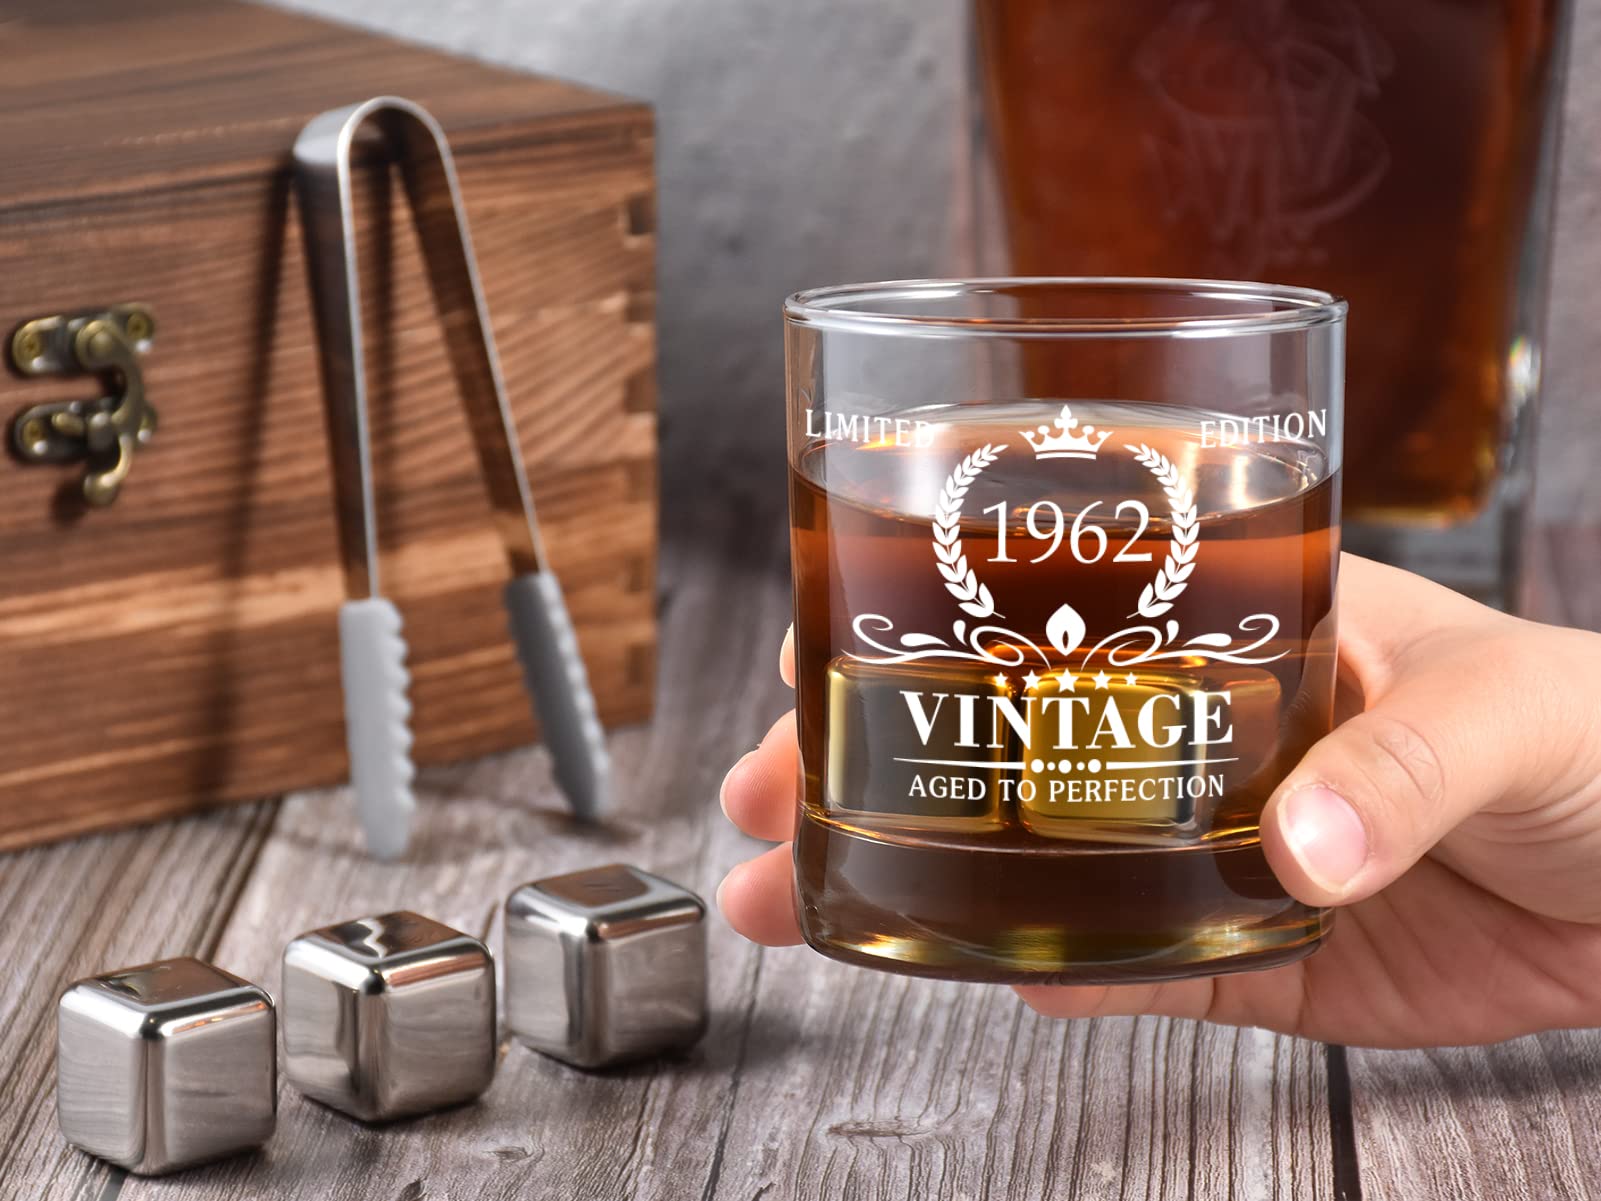 62nd Birthday Gifts for Men, Vintage 1962 Whiskey Glass and Stones Gift Set of 2, Funny 62 Birthday Gift for Dad Husband Brother, 62 Birthday Present Ideas for Him, 62 Year Old Bday Decorations